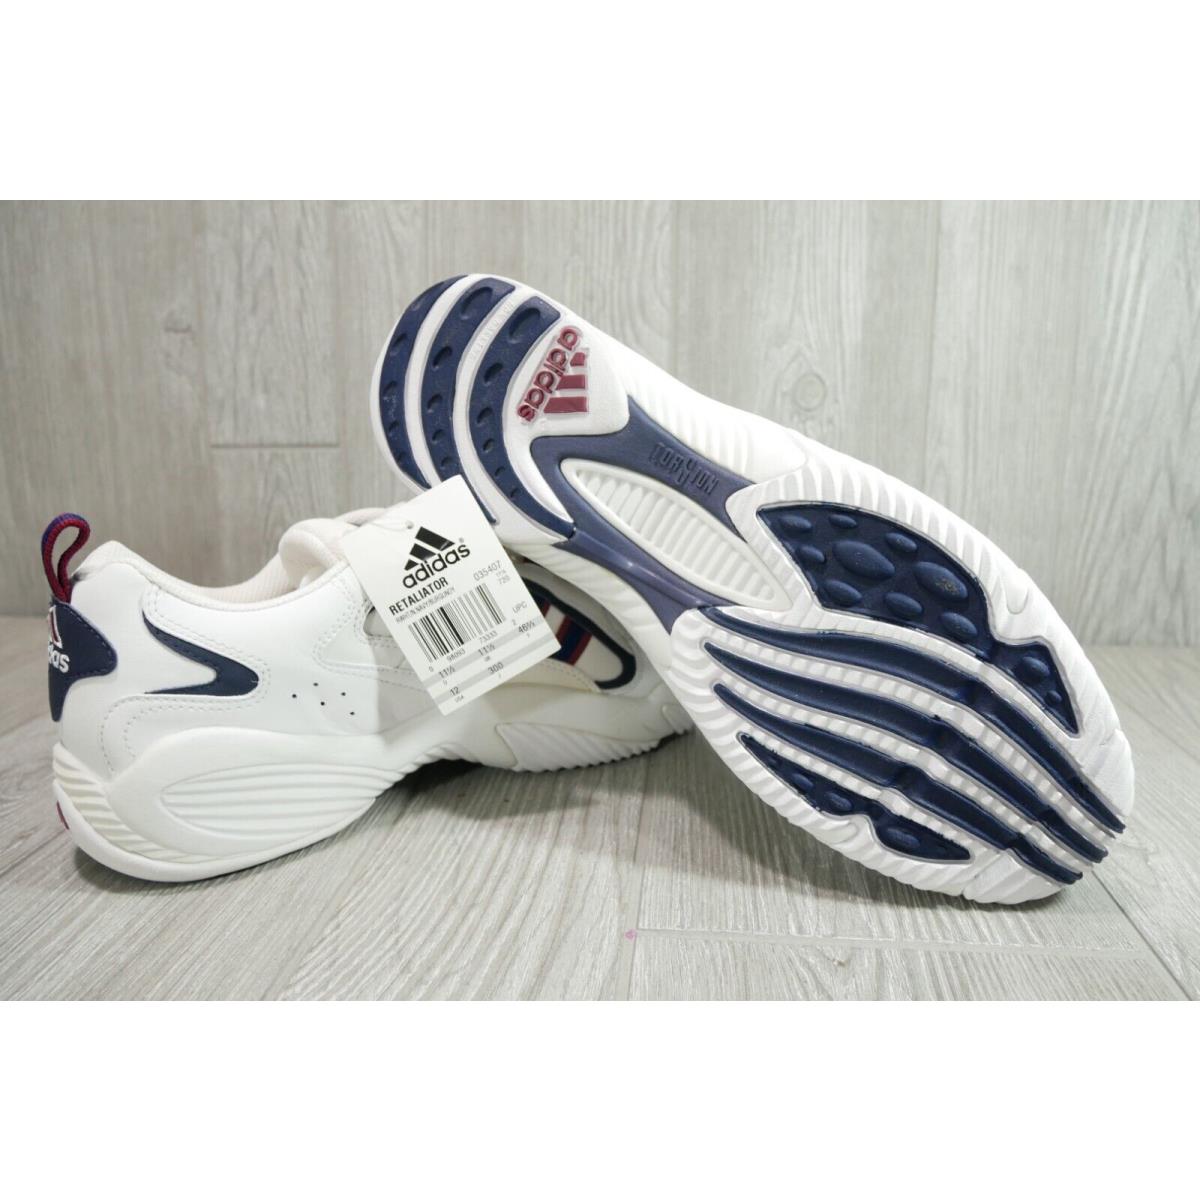 Adidas shoes Trainer - White 4